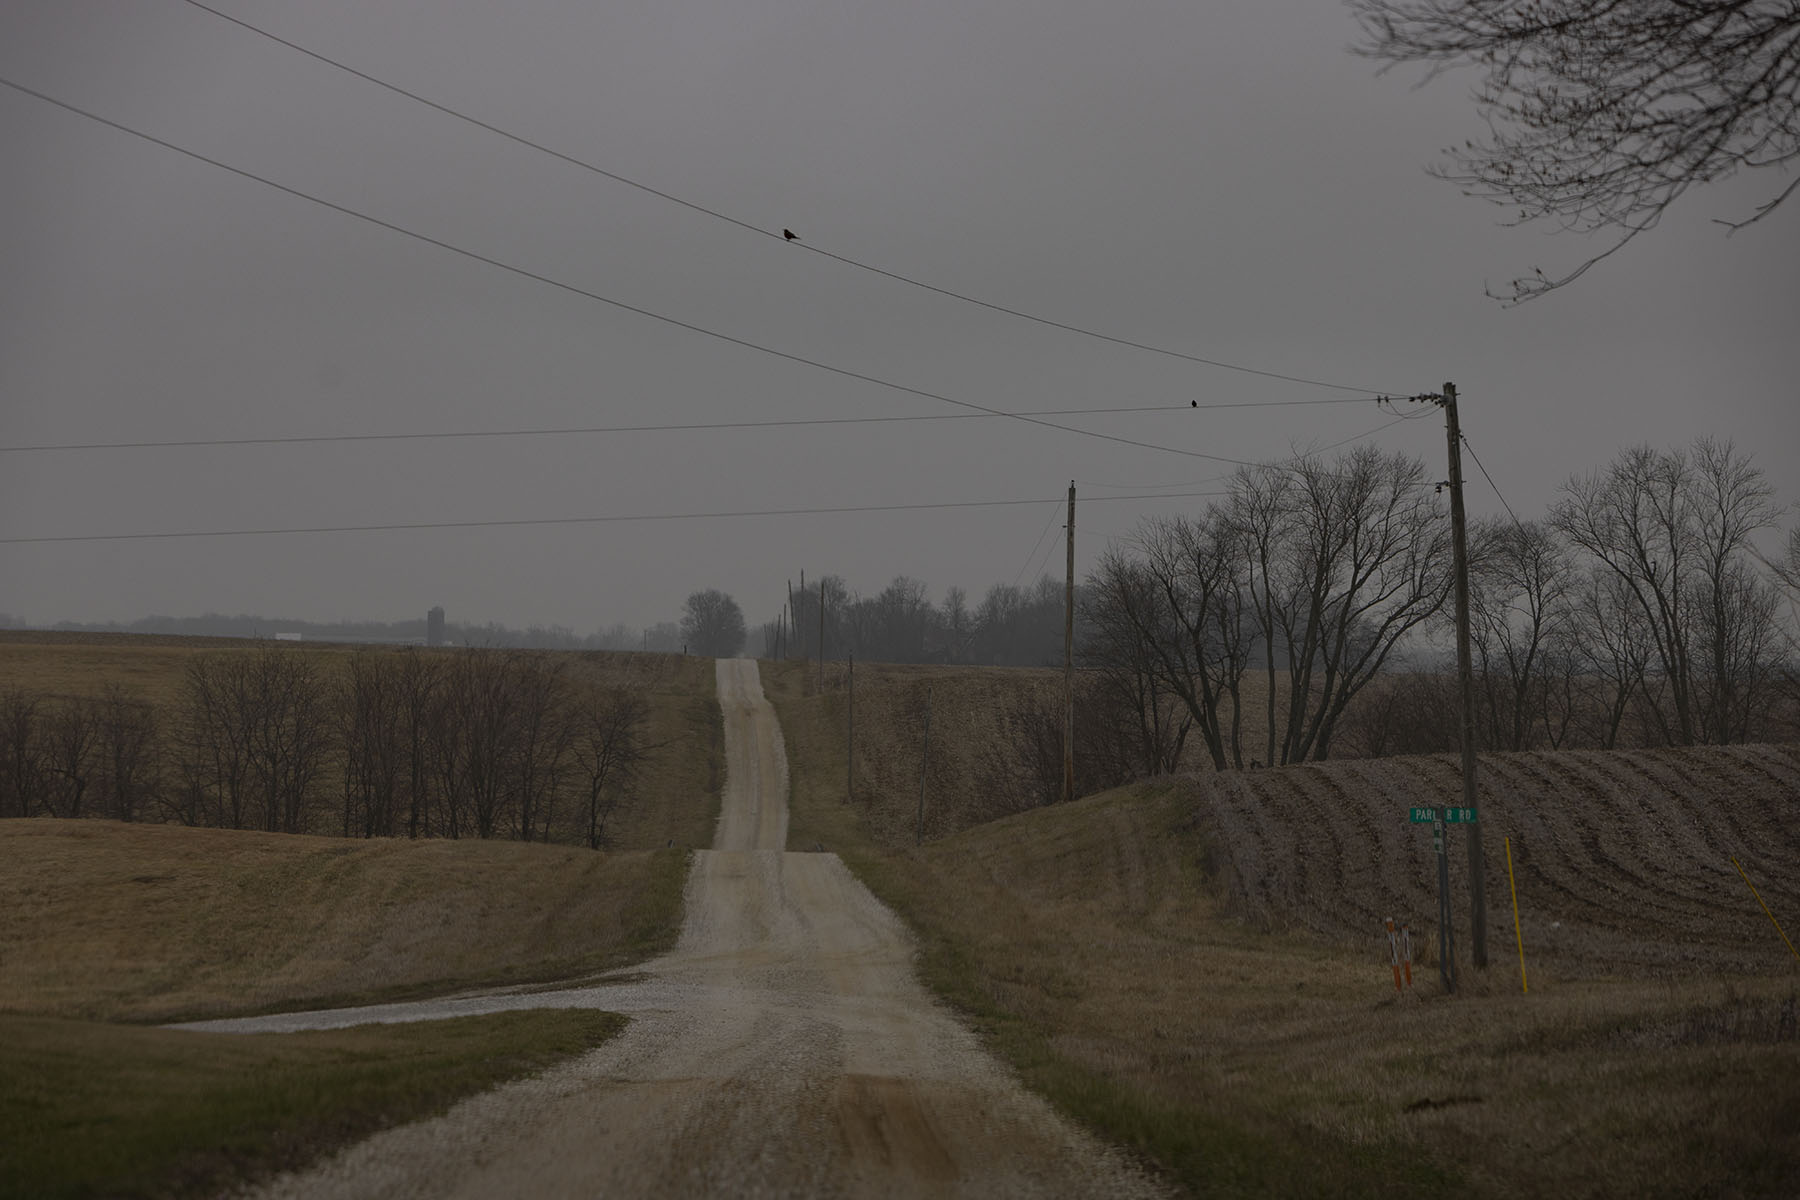 A country road is seen near Virginia, Illinois.